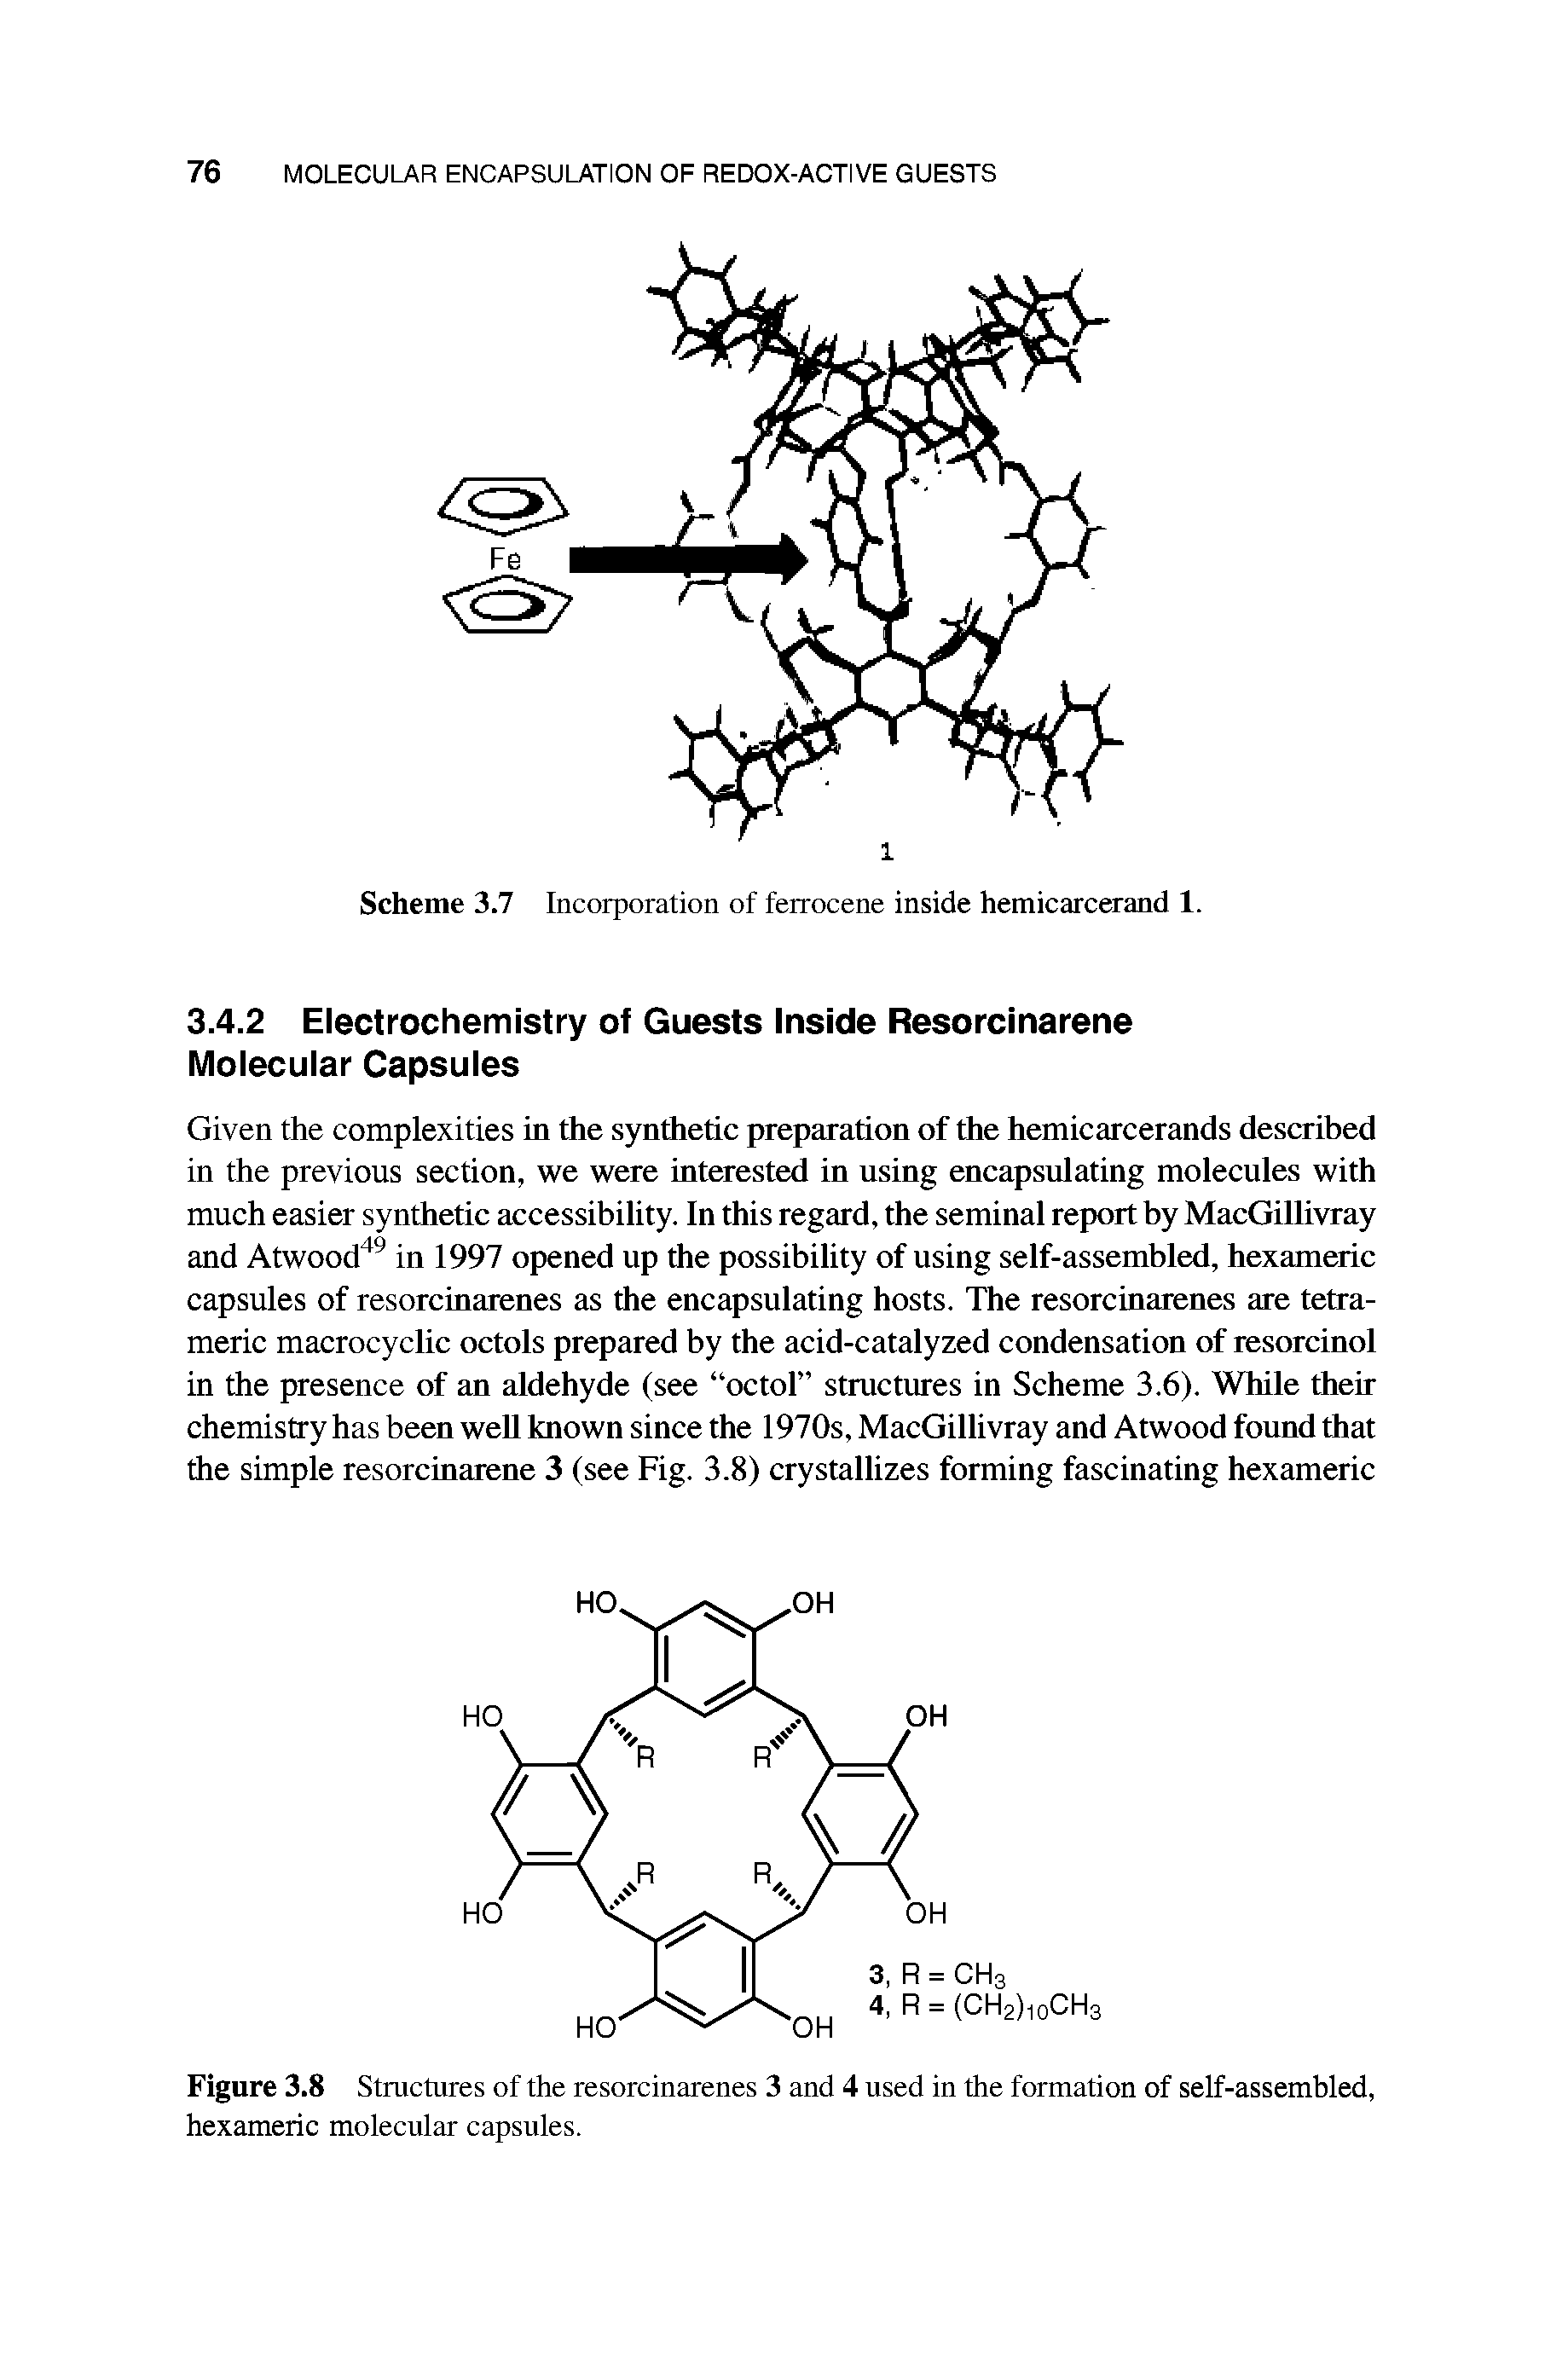 Figure 3.8 Structures of the resorcinarenes 3 and 4 used in the formation of self-assembled, hexameric molecular capsules.